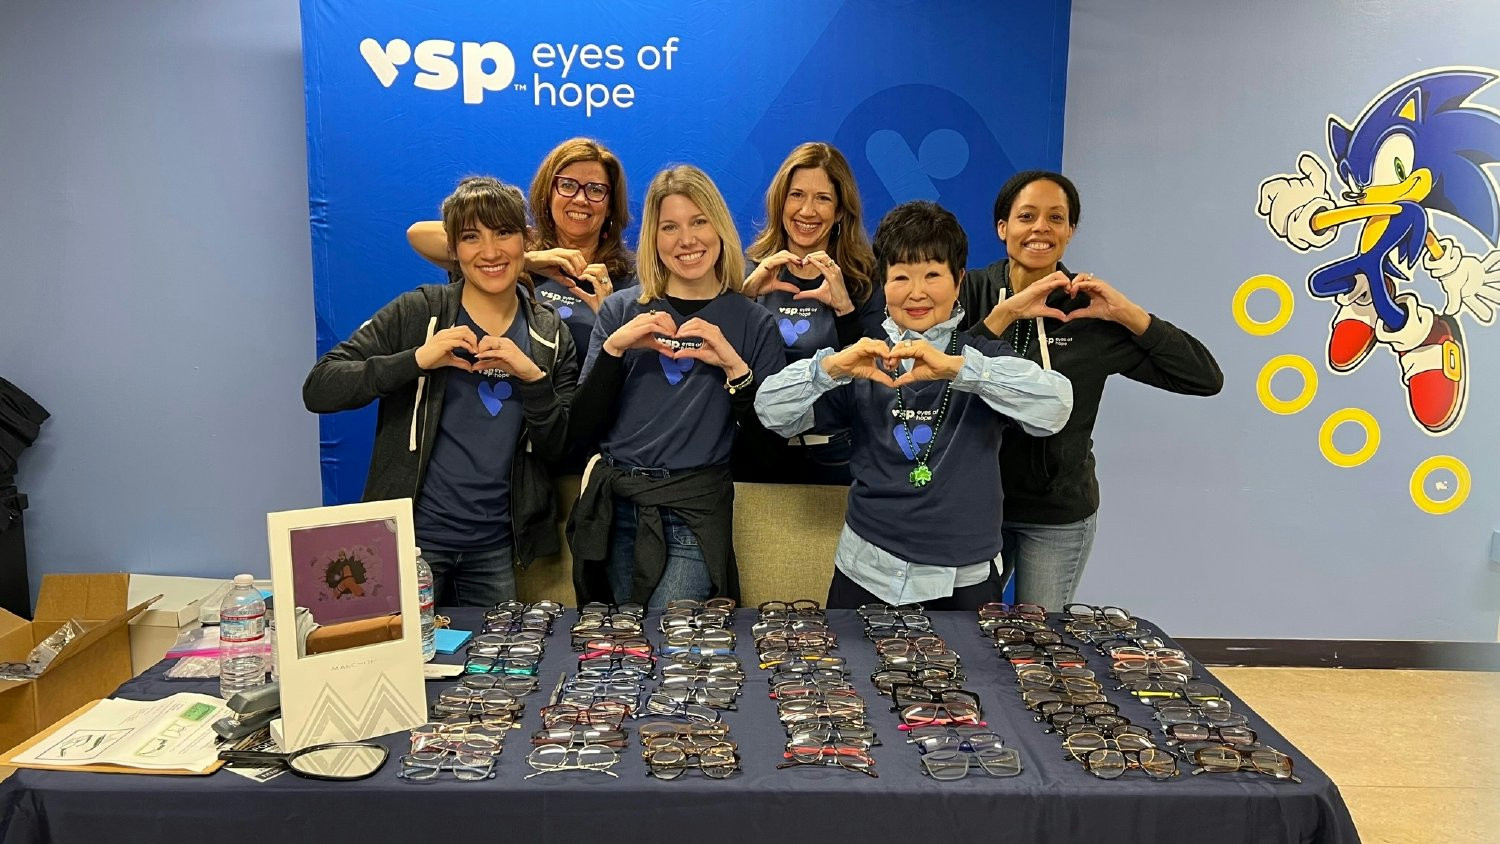 VSP Eyes of Hope volunteers joined by Board Member Barbara Adachi and Vision Care President Kate Renwick-Espinosa.